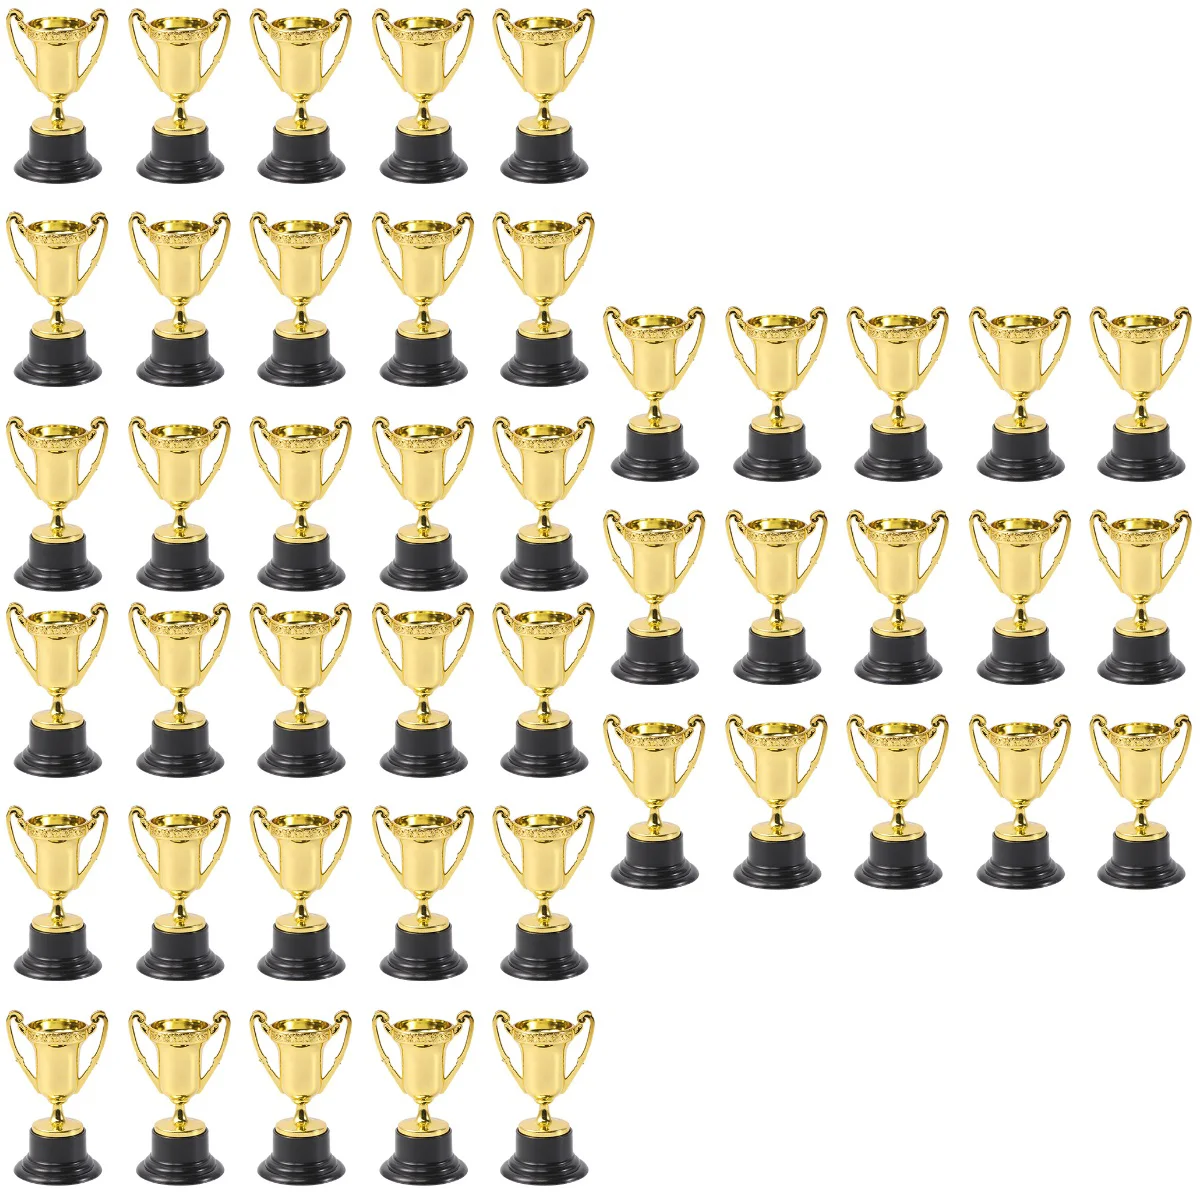 

Trophy Trophies Award Cup Kids Mini Prizes Awards Party Reward Winner Halloween Bulk Cups Football Medals Large Small Gold